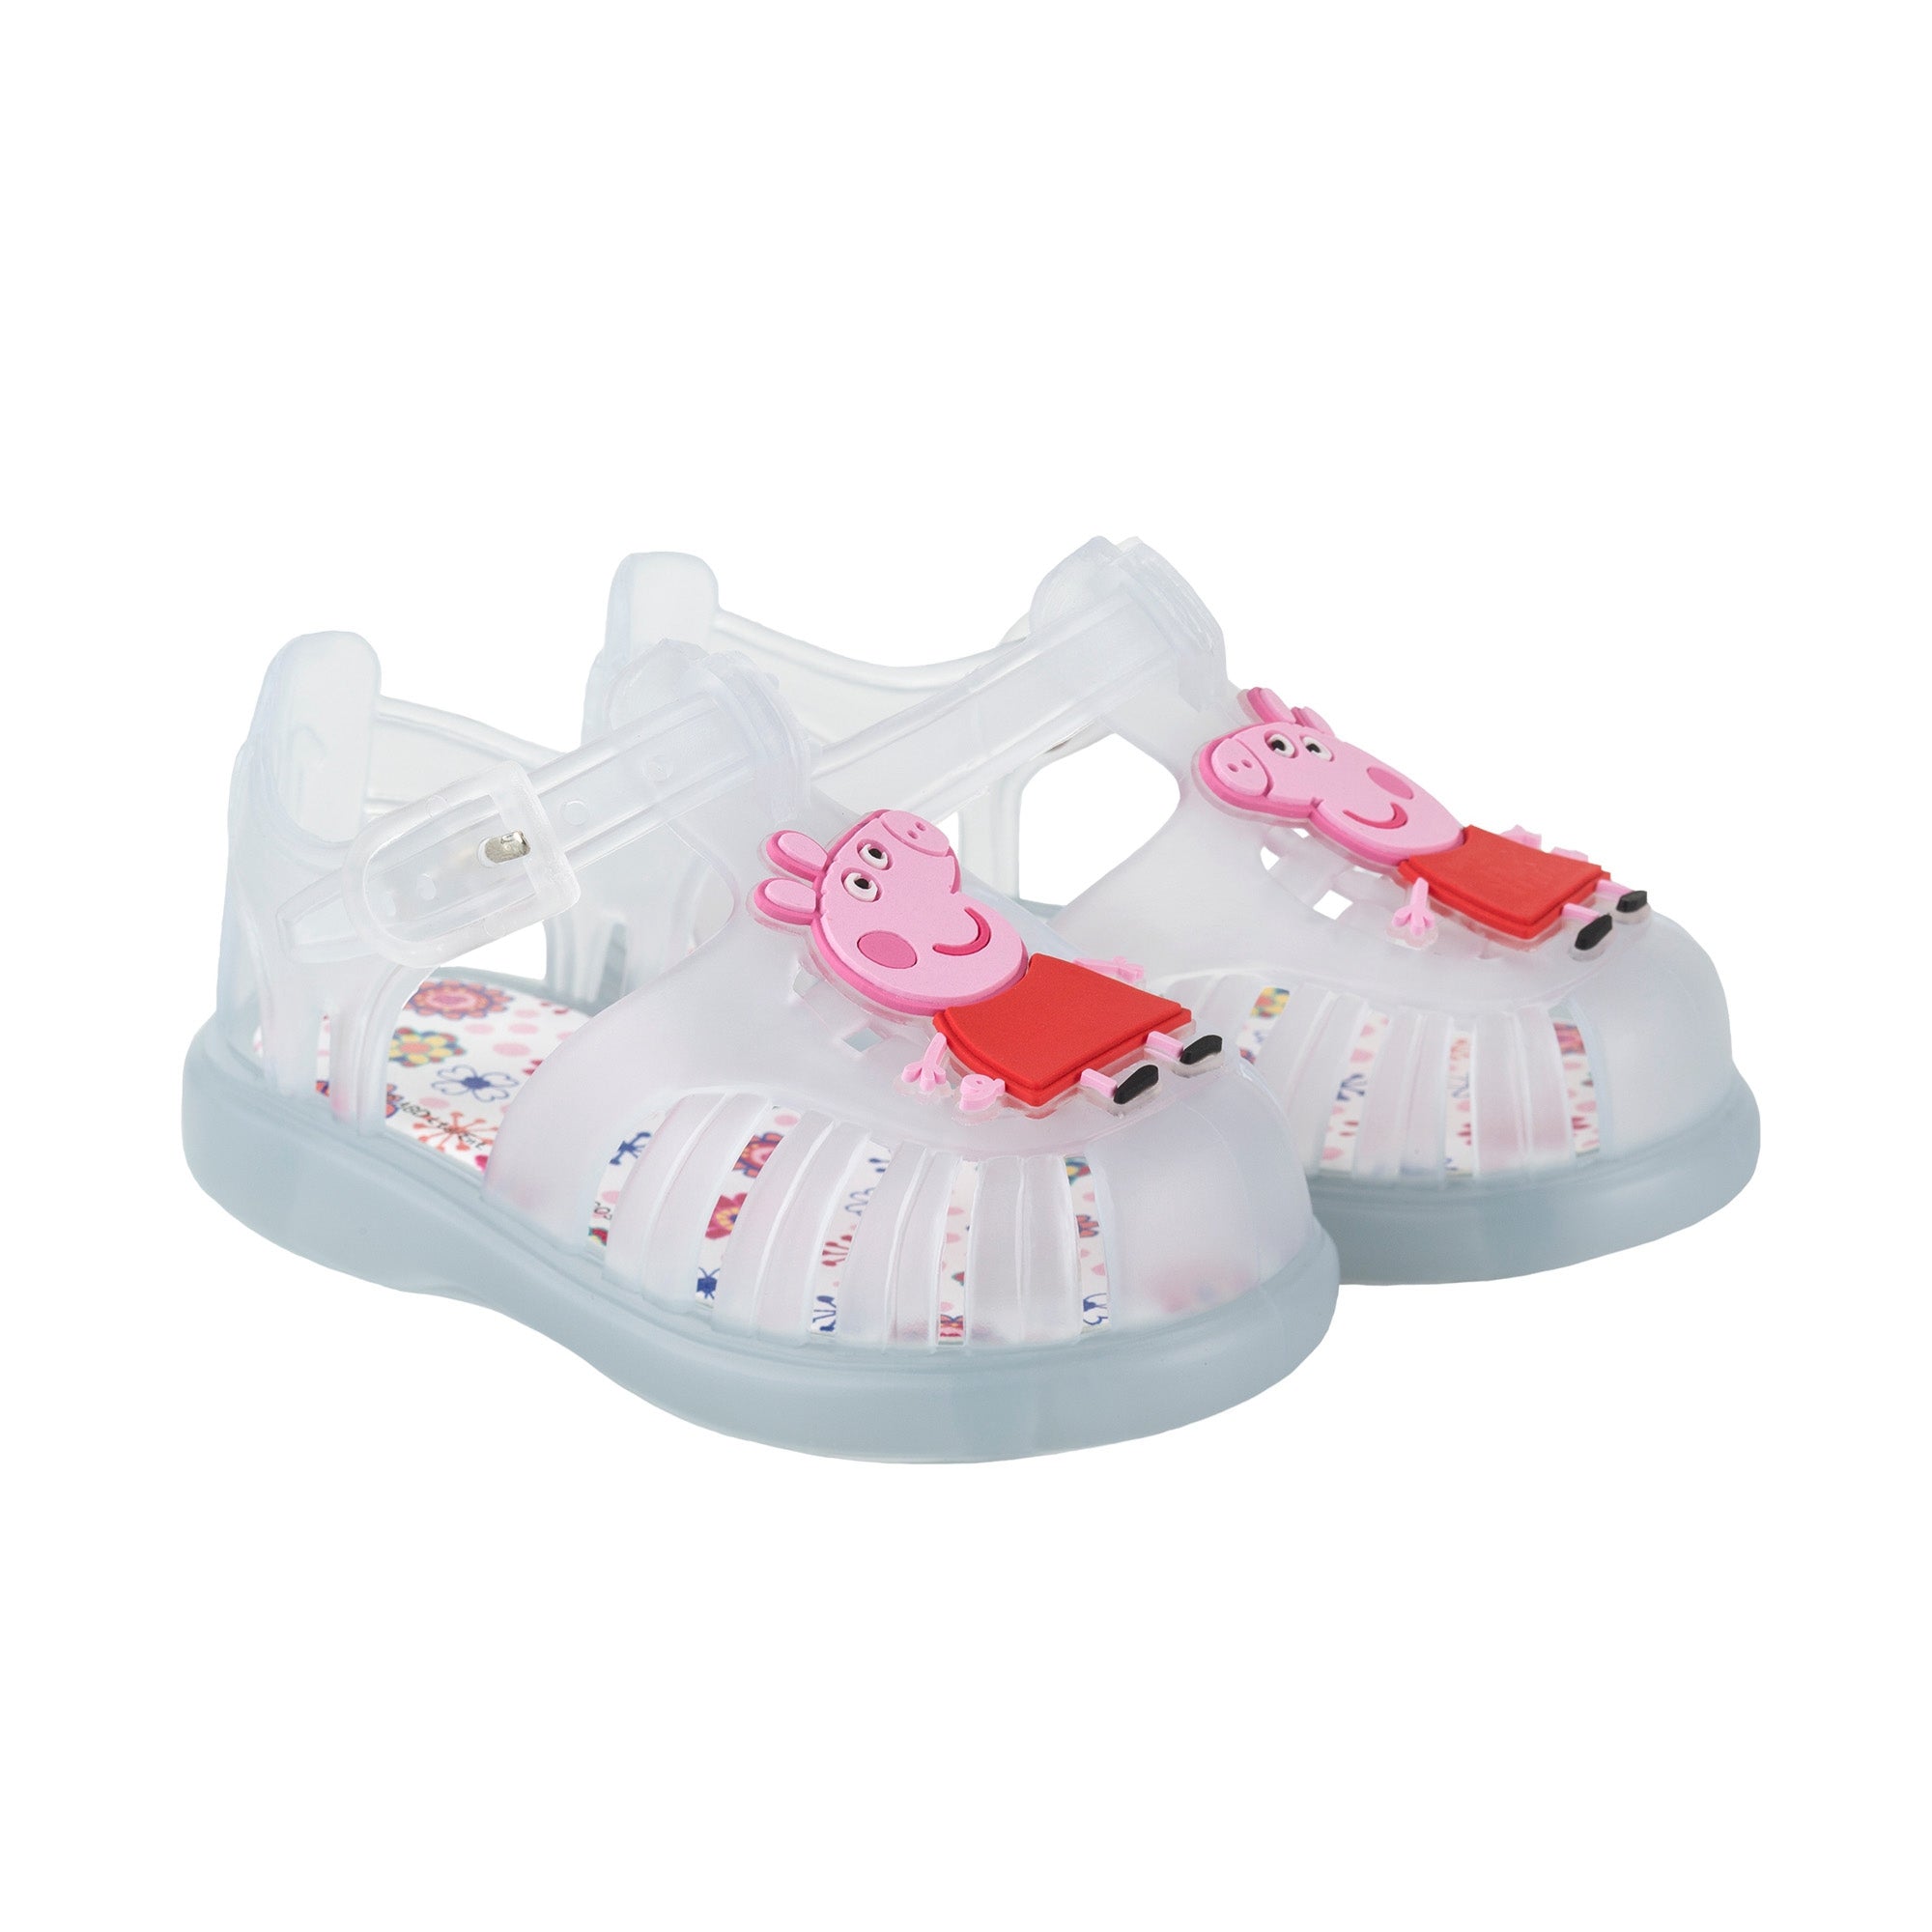 Girls & Boys Transparent White Jelly Shoes